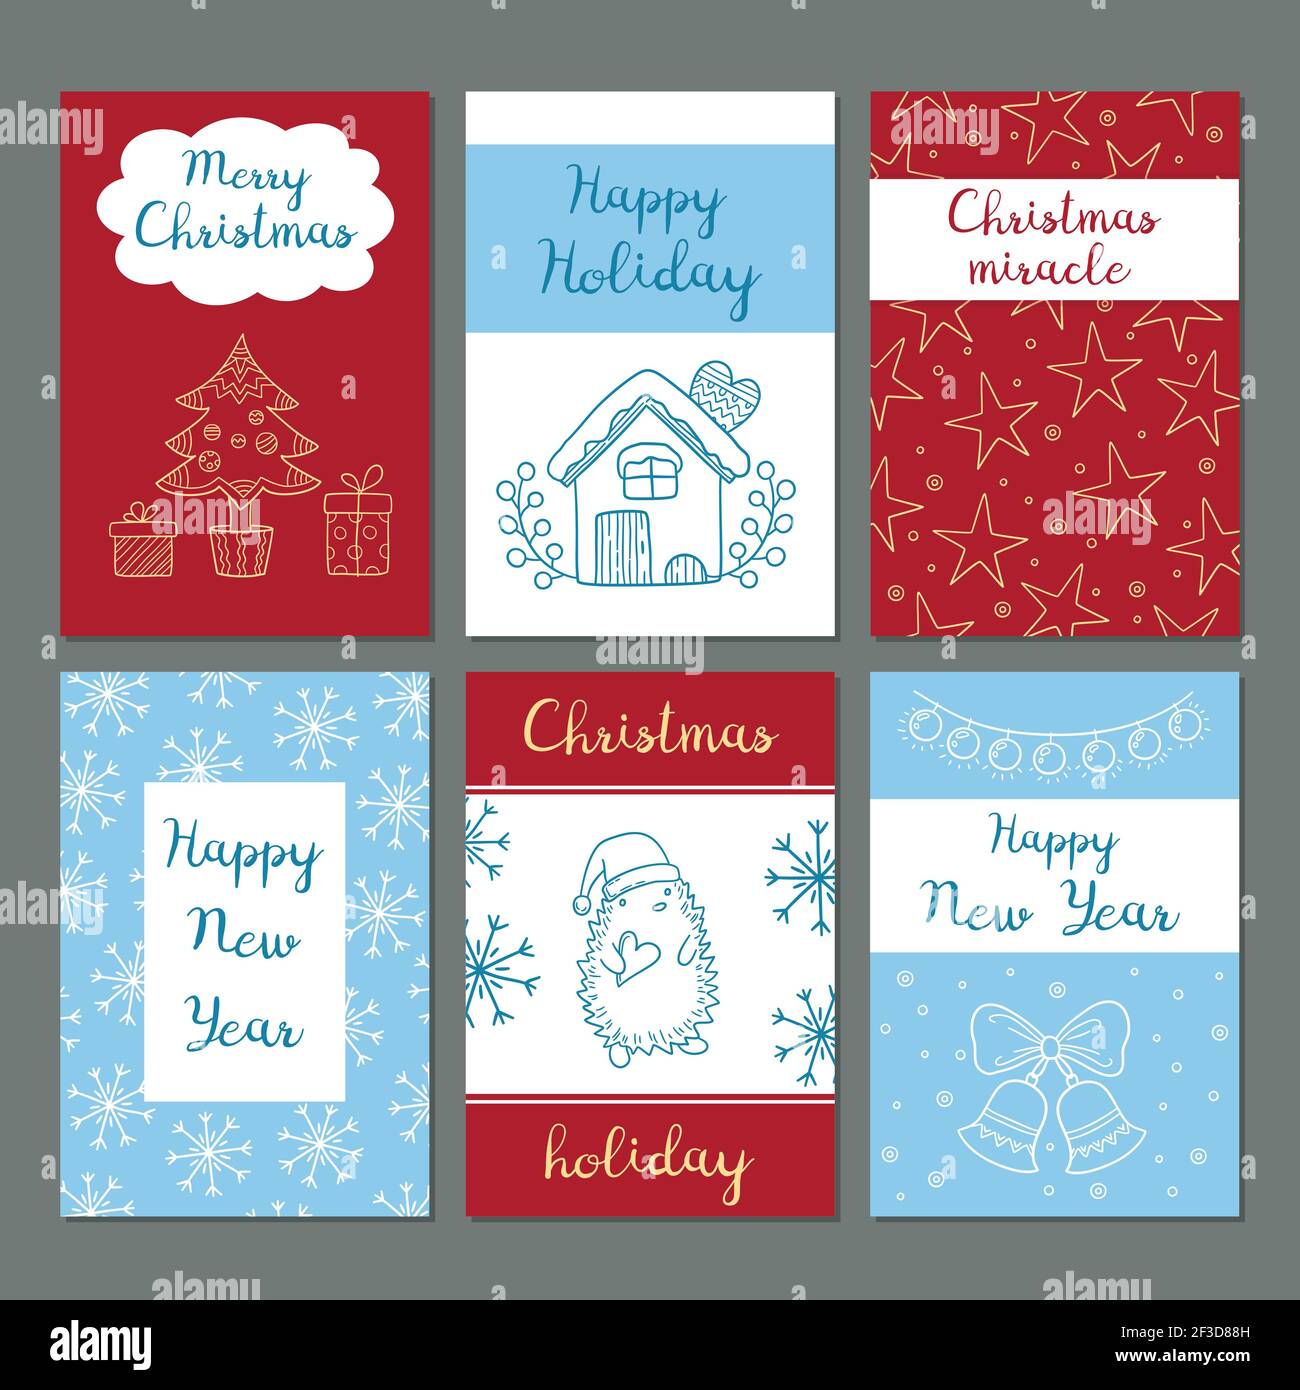 Christmas cards. Winter celebration greetings cards cute images snowflakes characters santa gifts clothes vector doodles hipster style Stock Vector